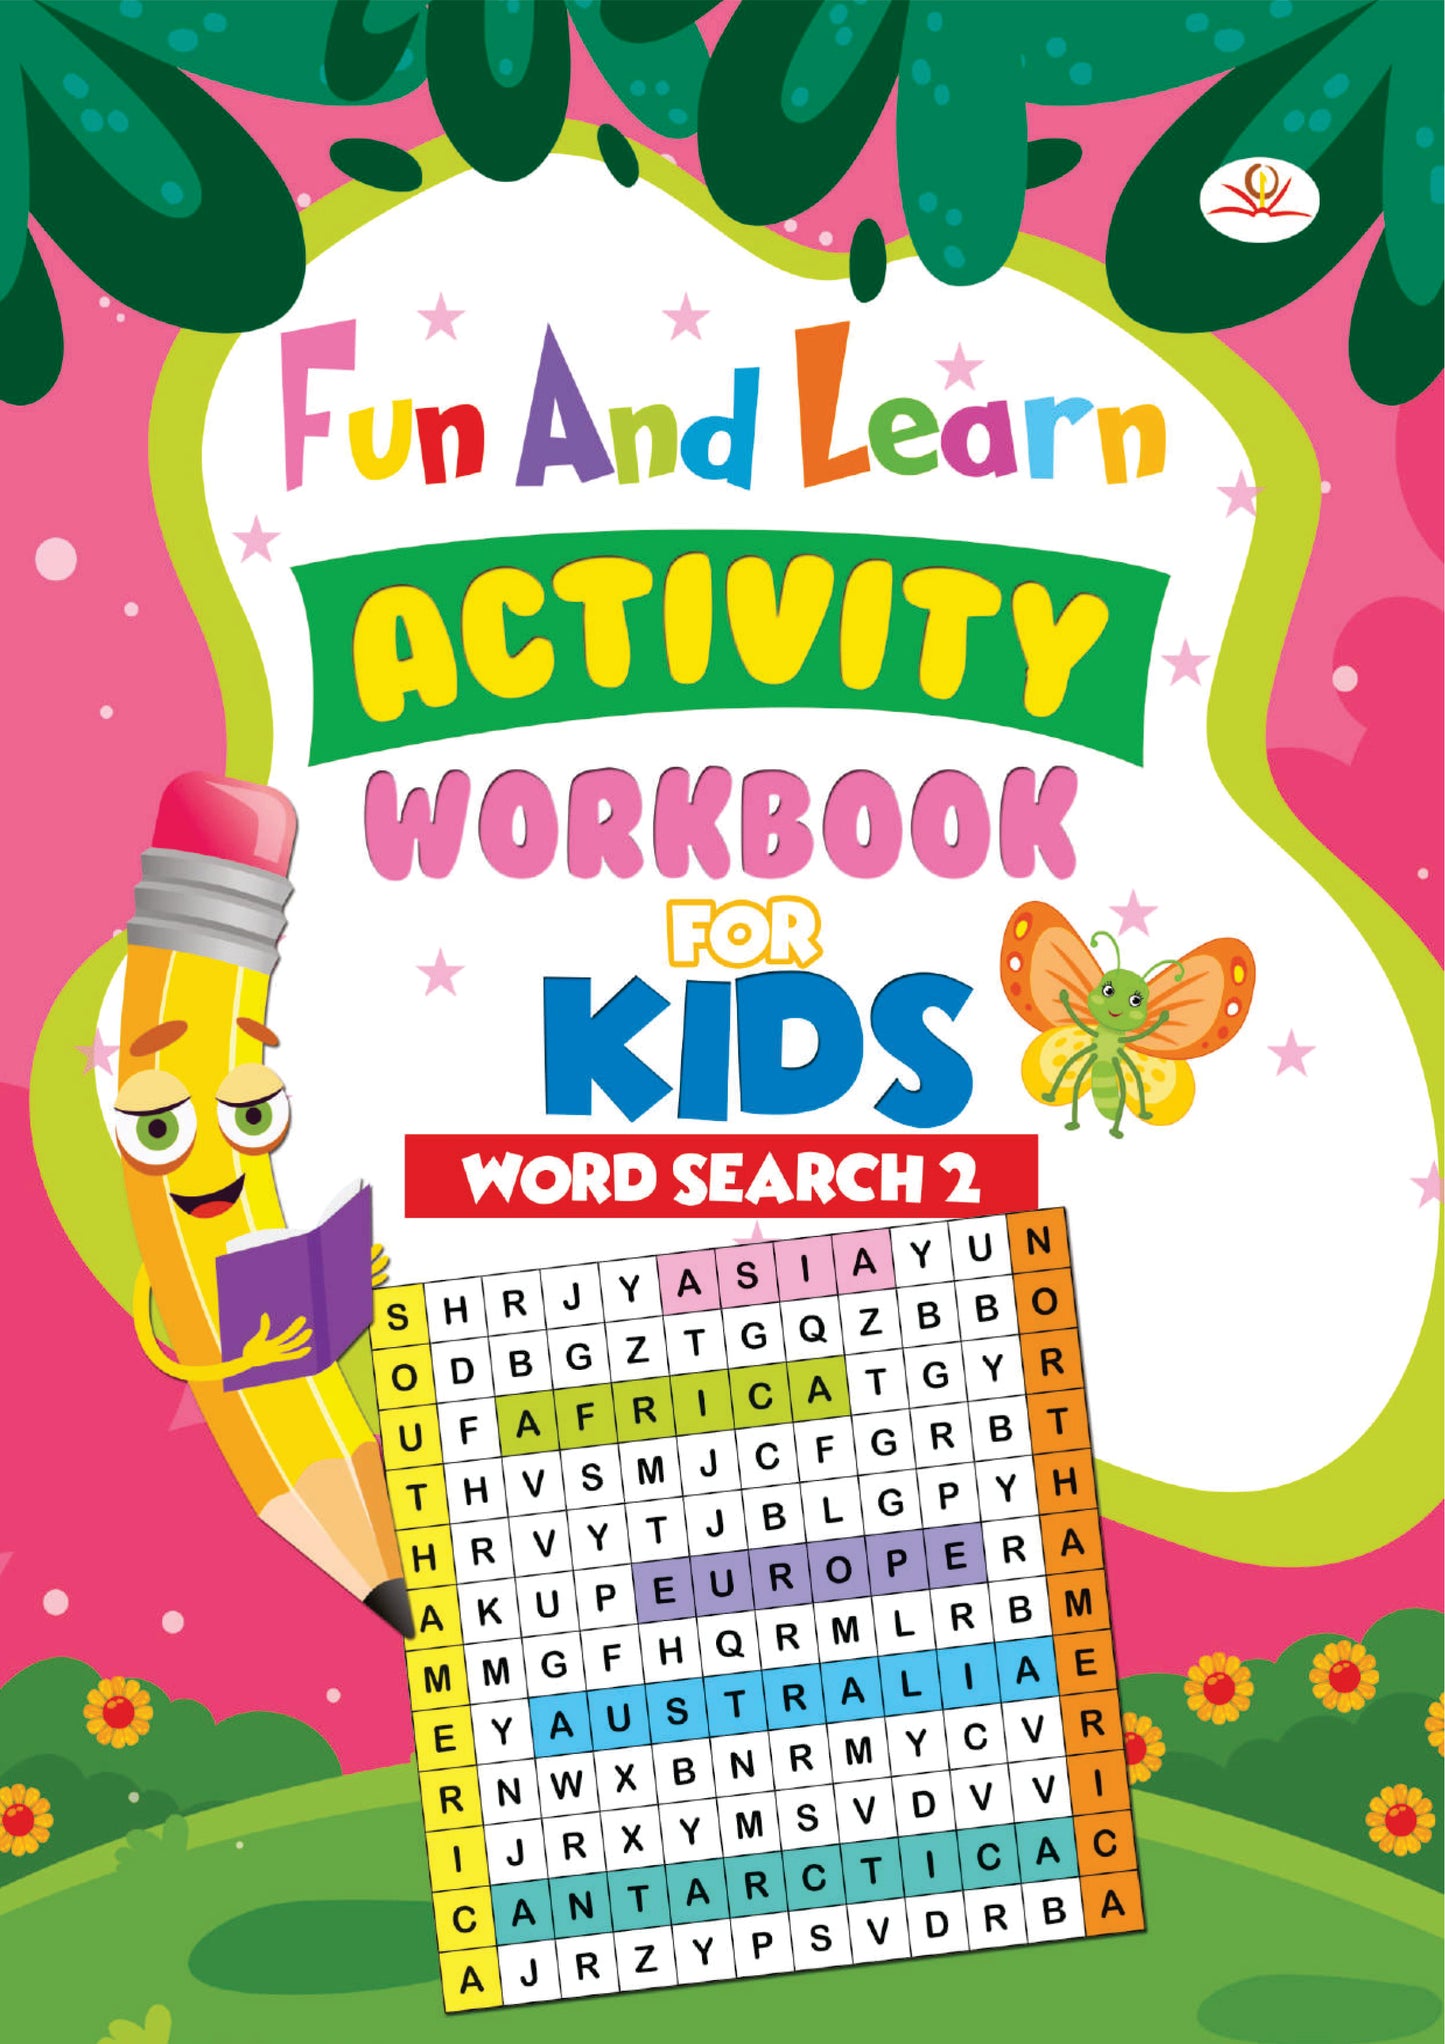 FUN AND LEARN ACTIVITY WORKBOOK FOR KIDS Word Search-2